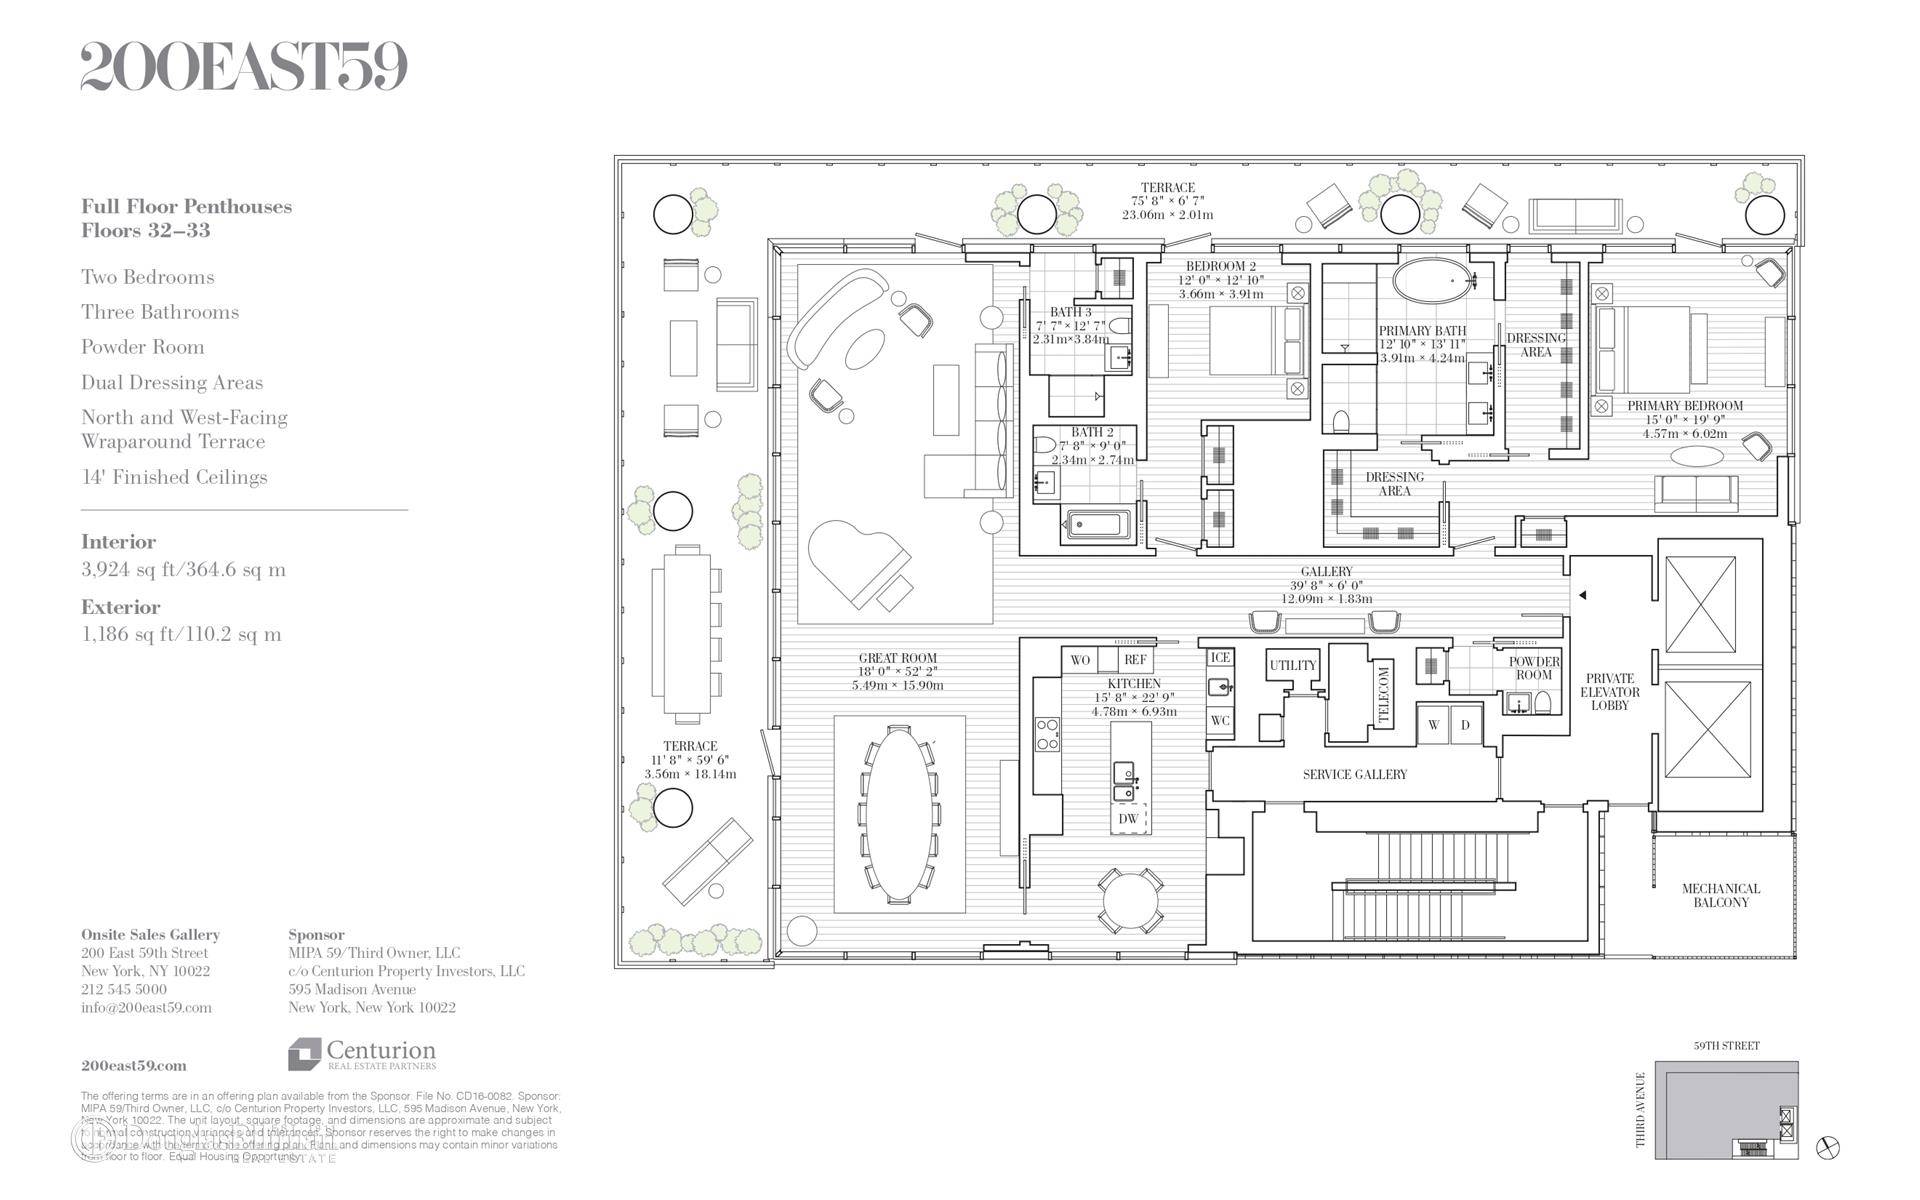 Introducing Penthouse 33, an unparalleled, three bedroom, three and a half bath full floor residence with 14' finished ceilings, gas fireplace, and 148 linear feet of continuous terrace with 360 ...